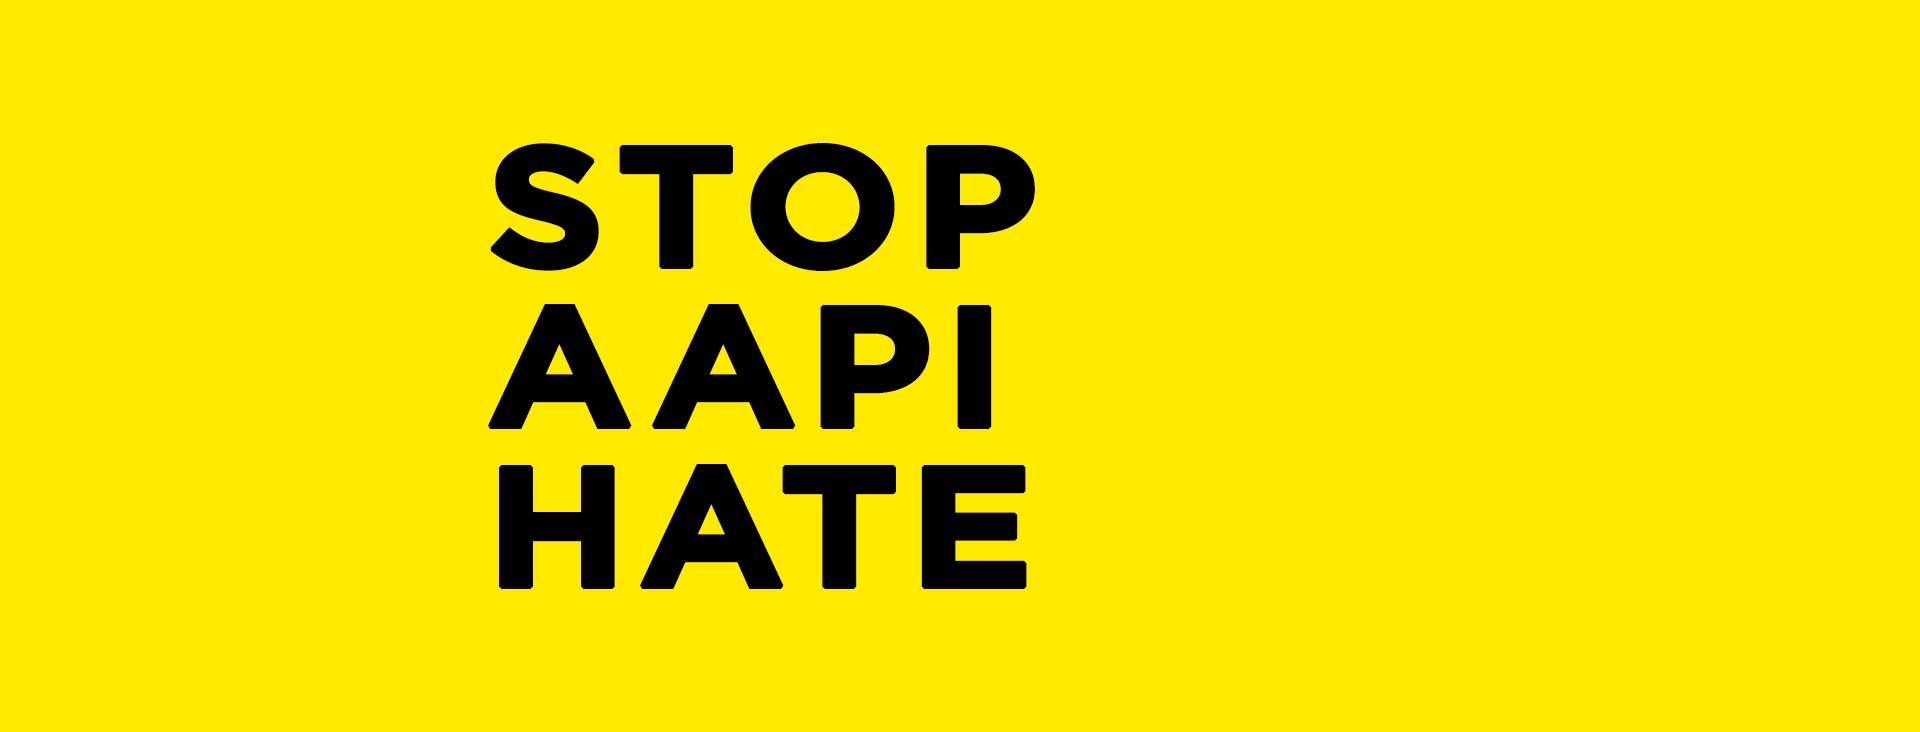 Stop AAPI Hate graphic